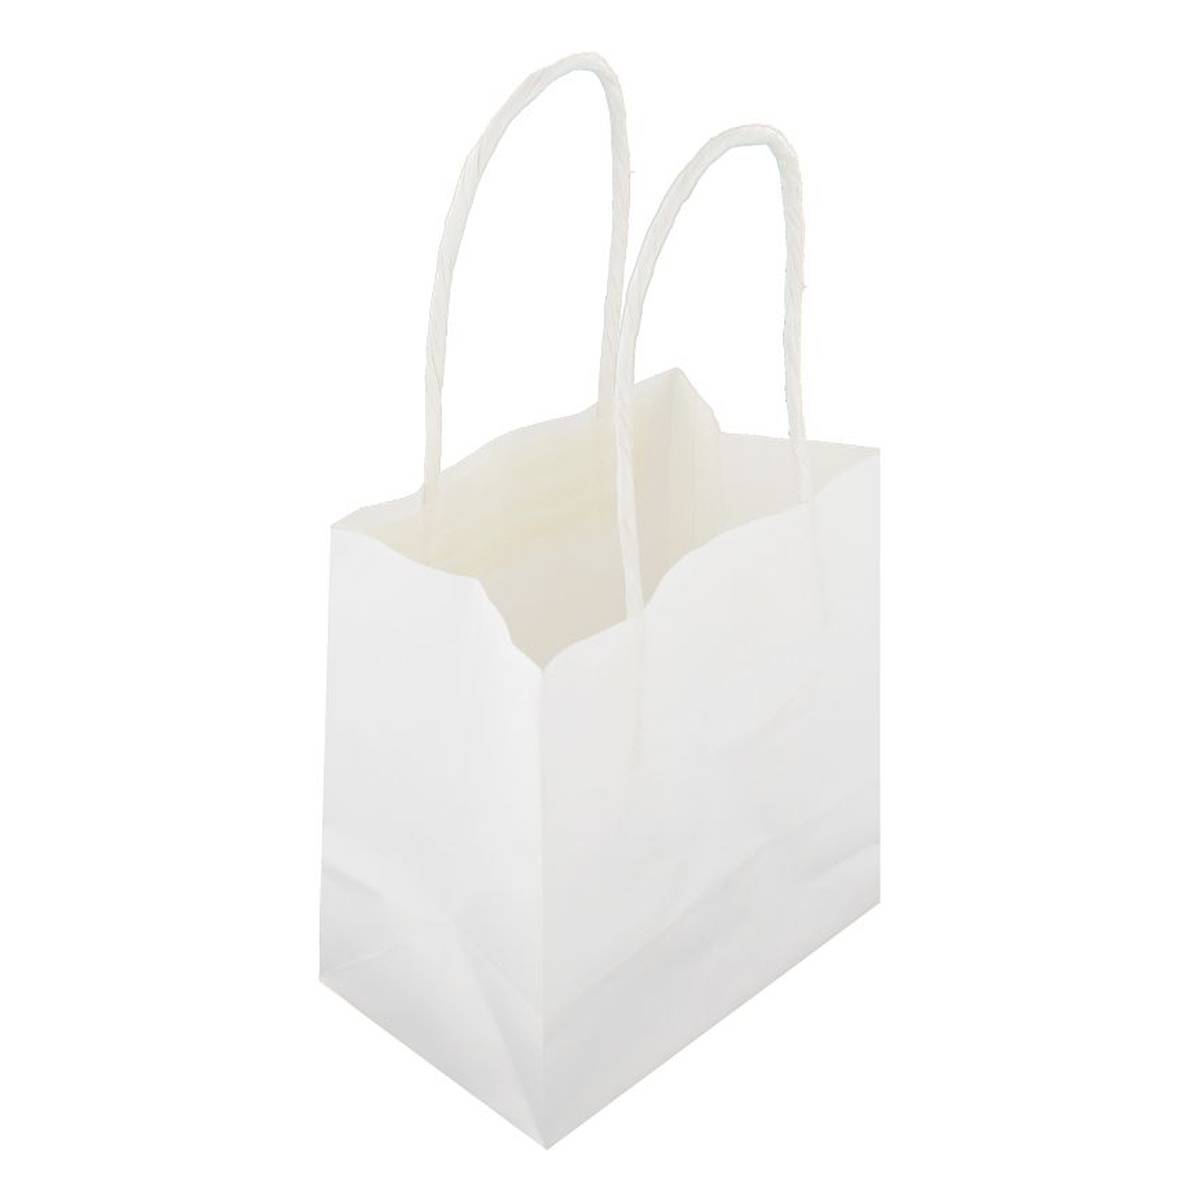 566816 1003 1 white ready to decorate gift bags 5 pack 800